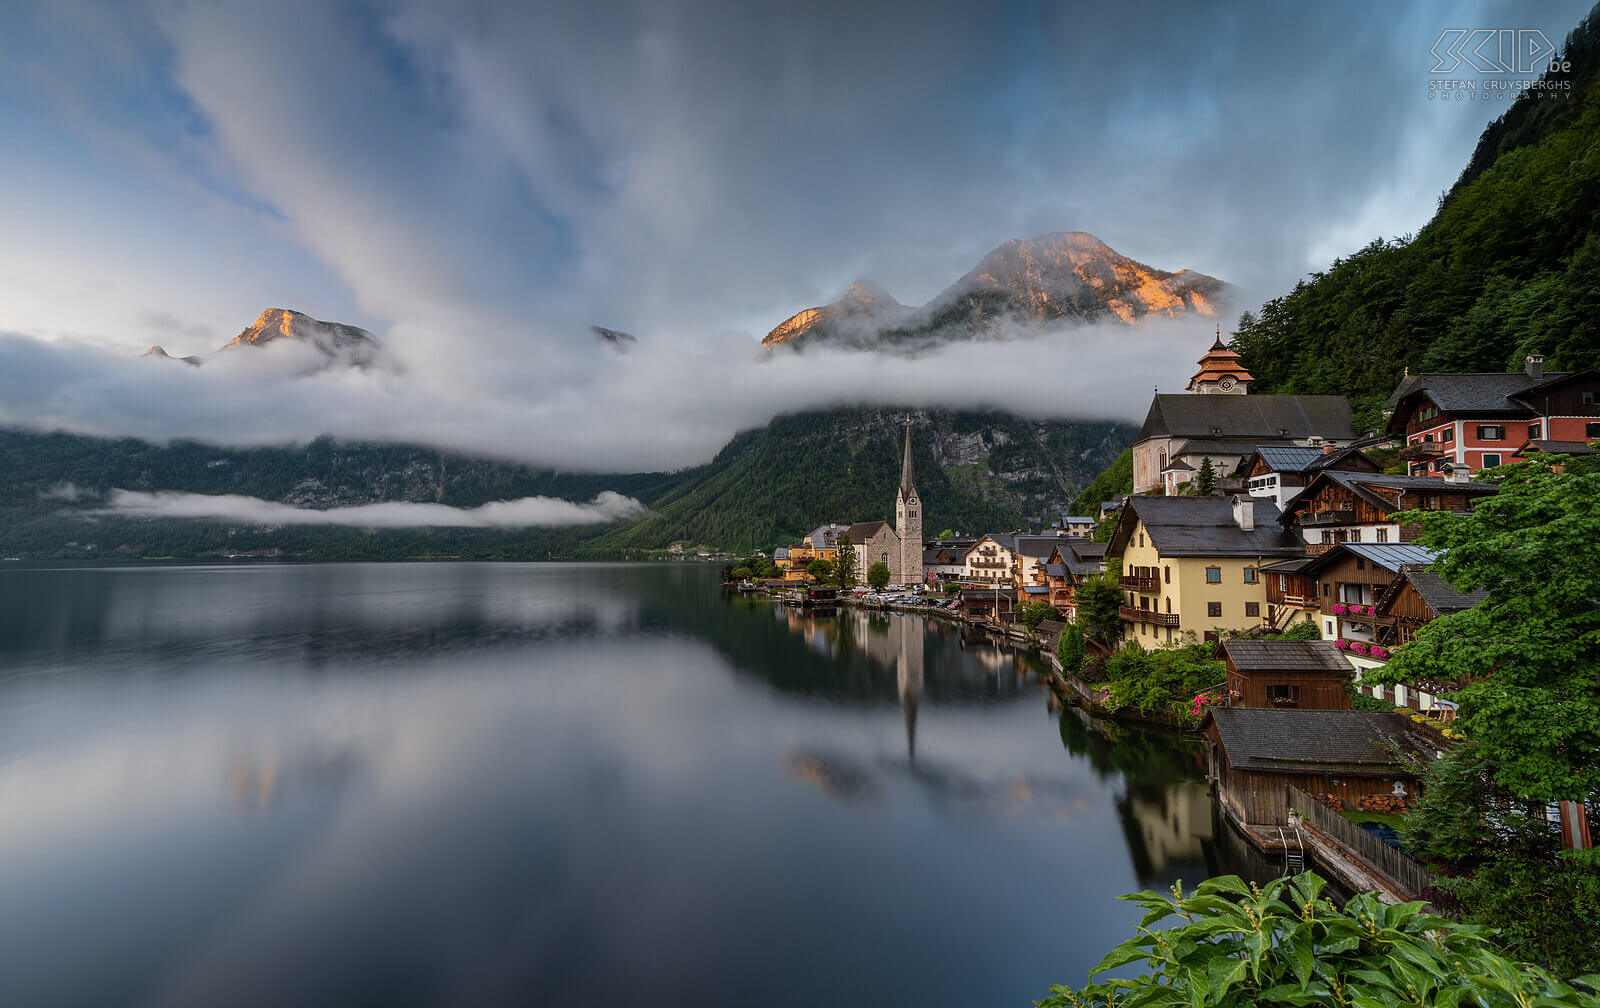 Hallstatt - Alpine glow We stayed one night in the picturesque, famous and popular village of Hallstatt. This village is located between the Hallstättersee and the Dachstein Mountains. In the morning I went out to take pictures. The sunrise was not spectacular and there were a lot of low hanging clouds but for a few minutes a beautiful alpine glow was visible on a couple of mountain peaks. Stefan Cruysberghs